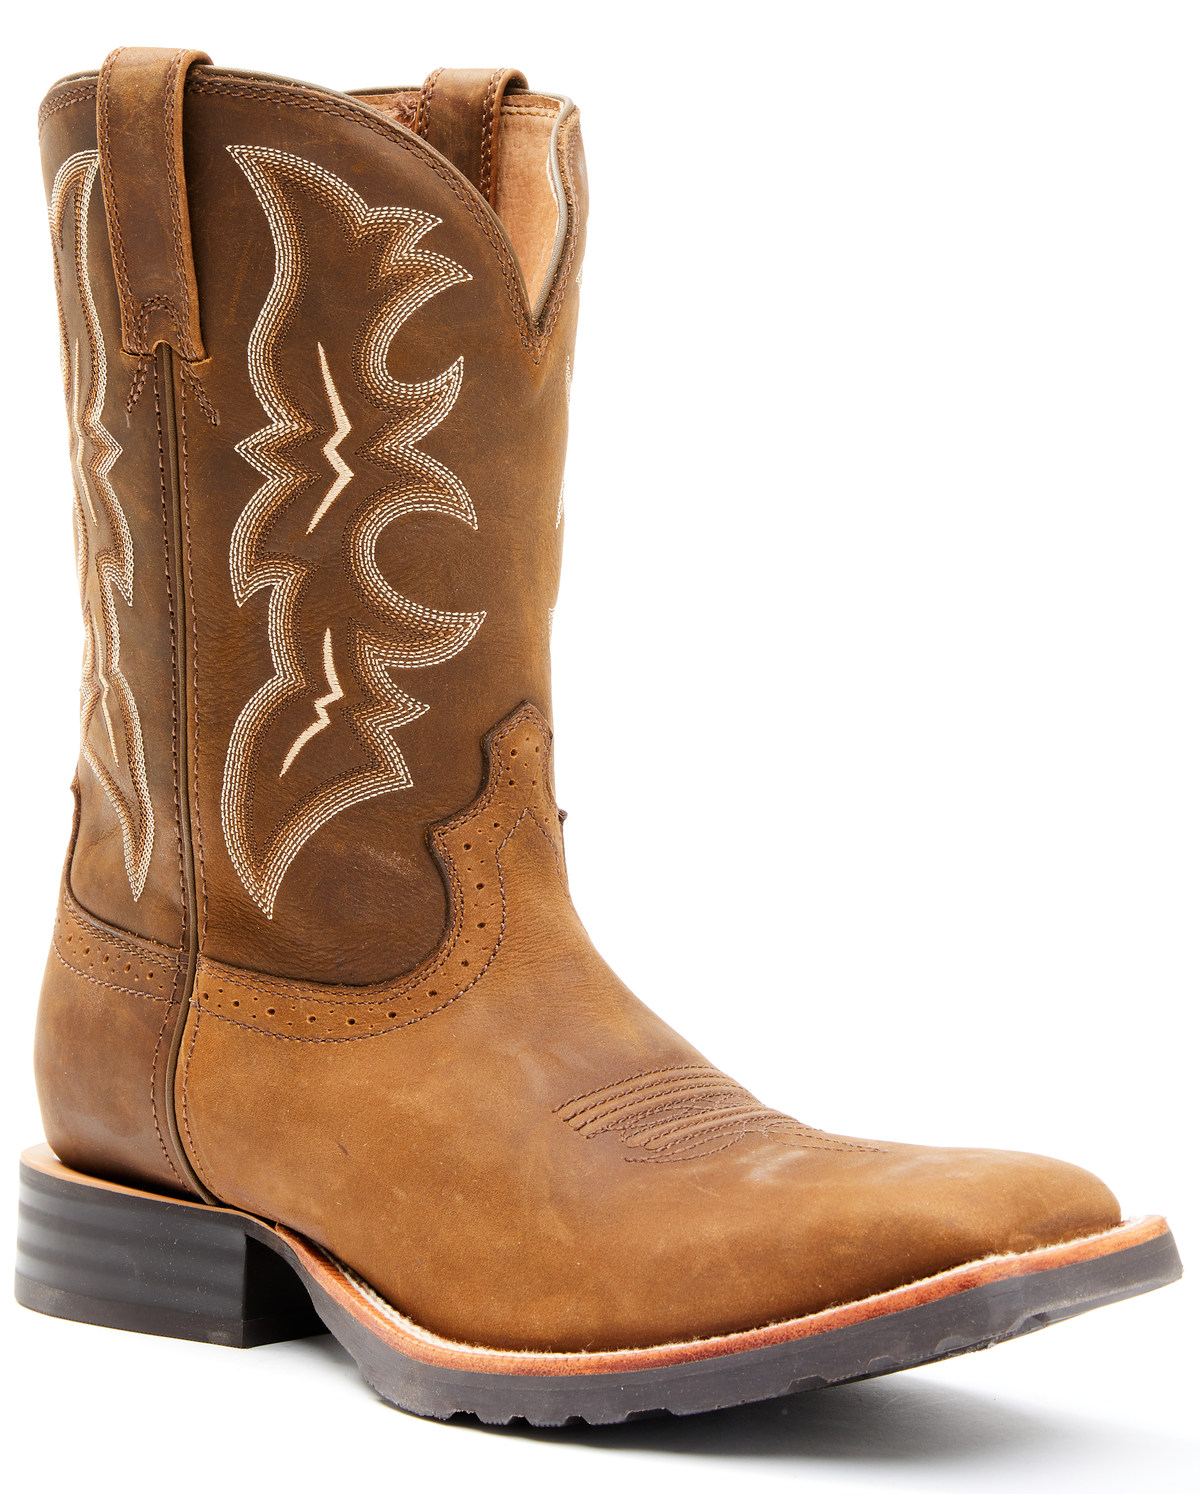 Wrangler Footwear Men's All-Around Western Boots - Broad Square Toe